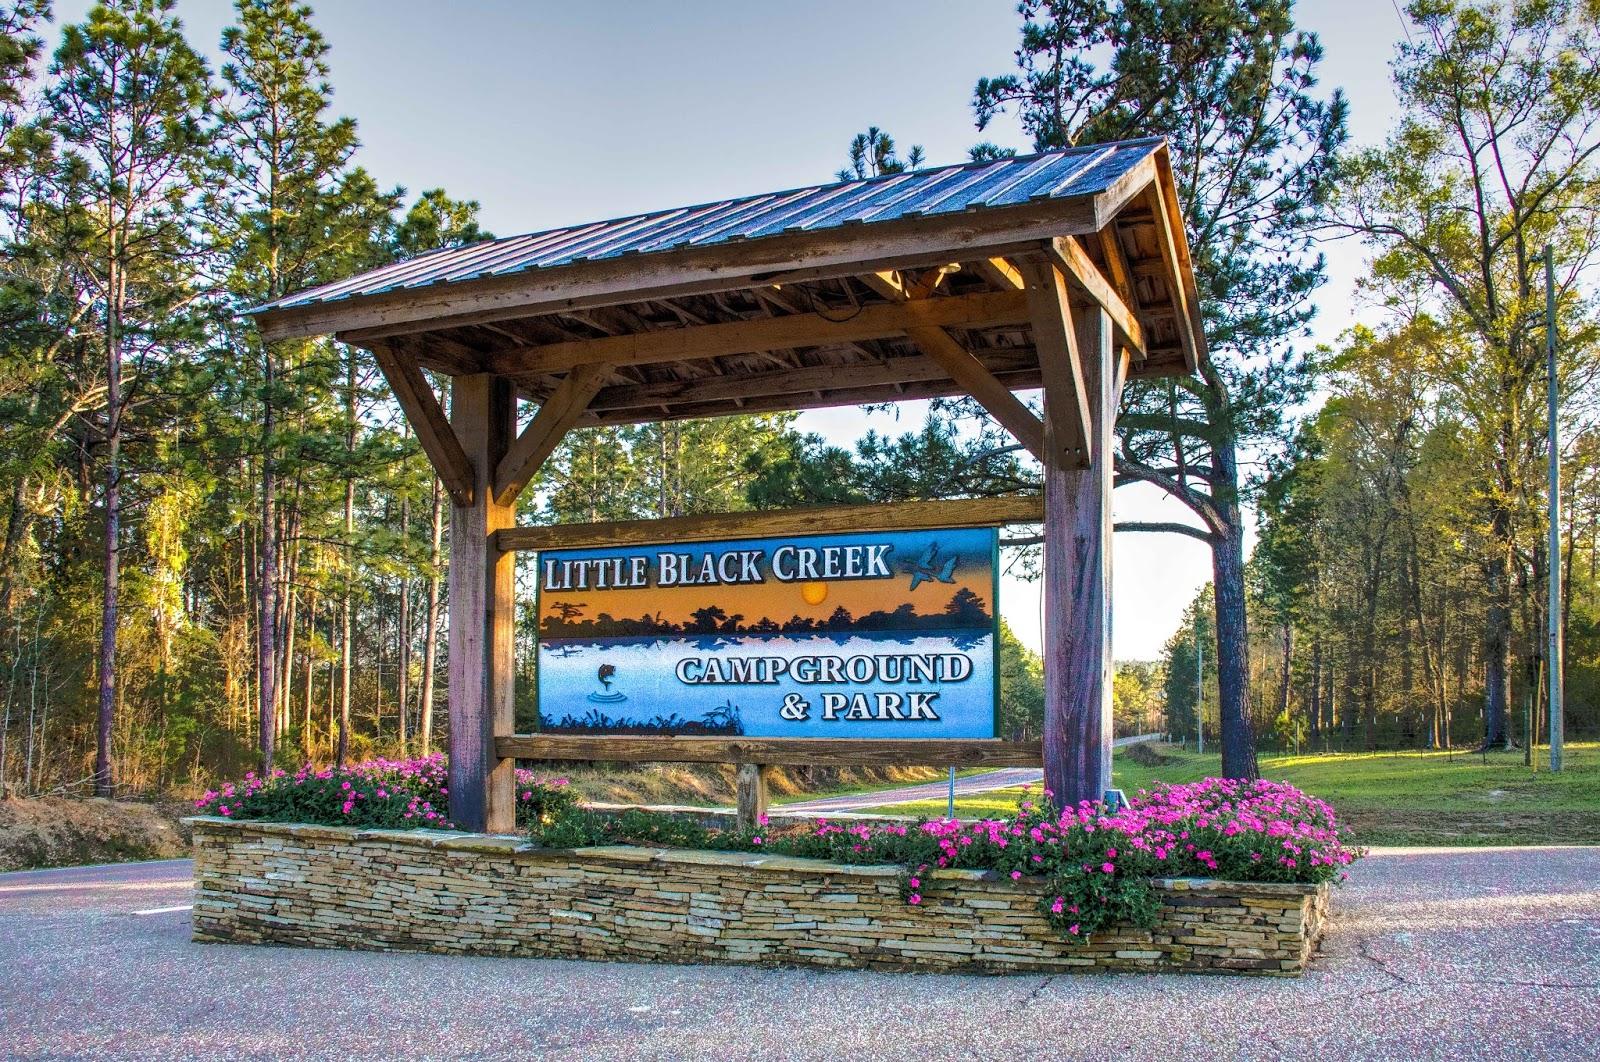 Sandee - Little Black Creek Campground And Park